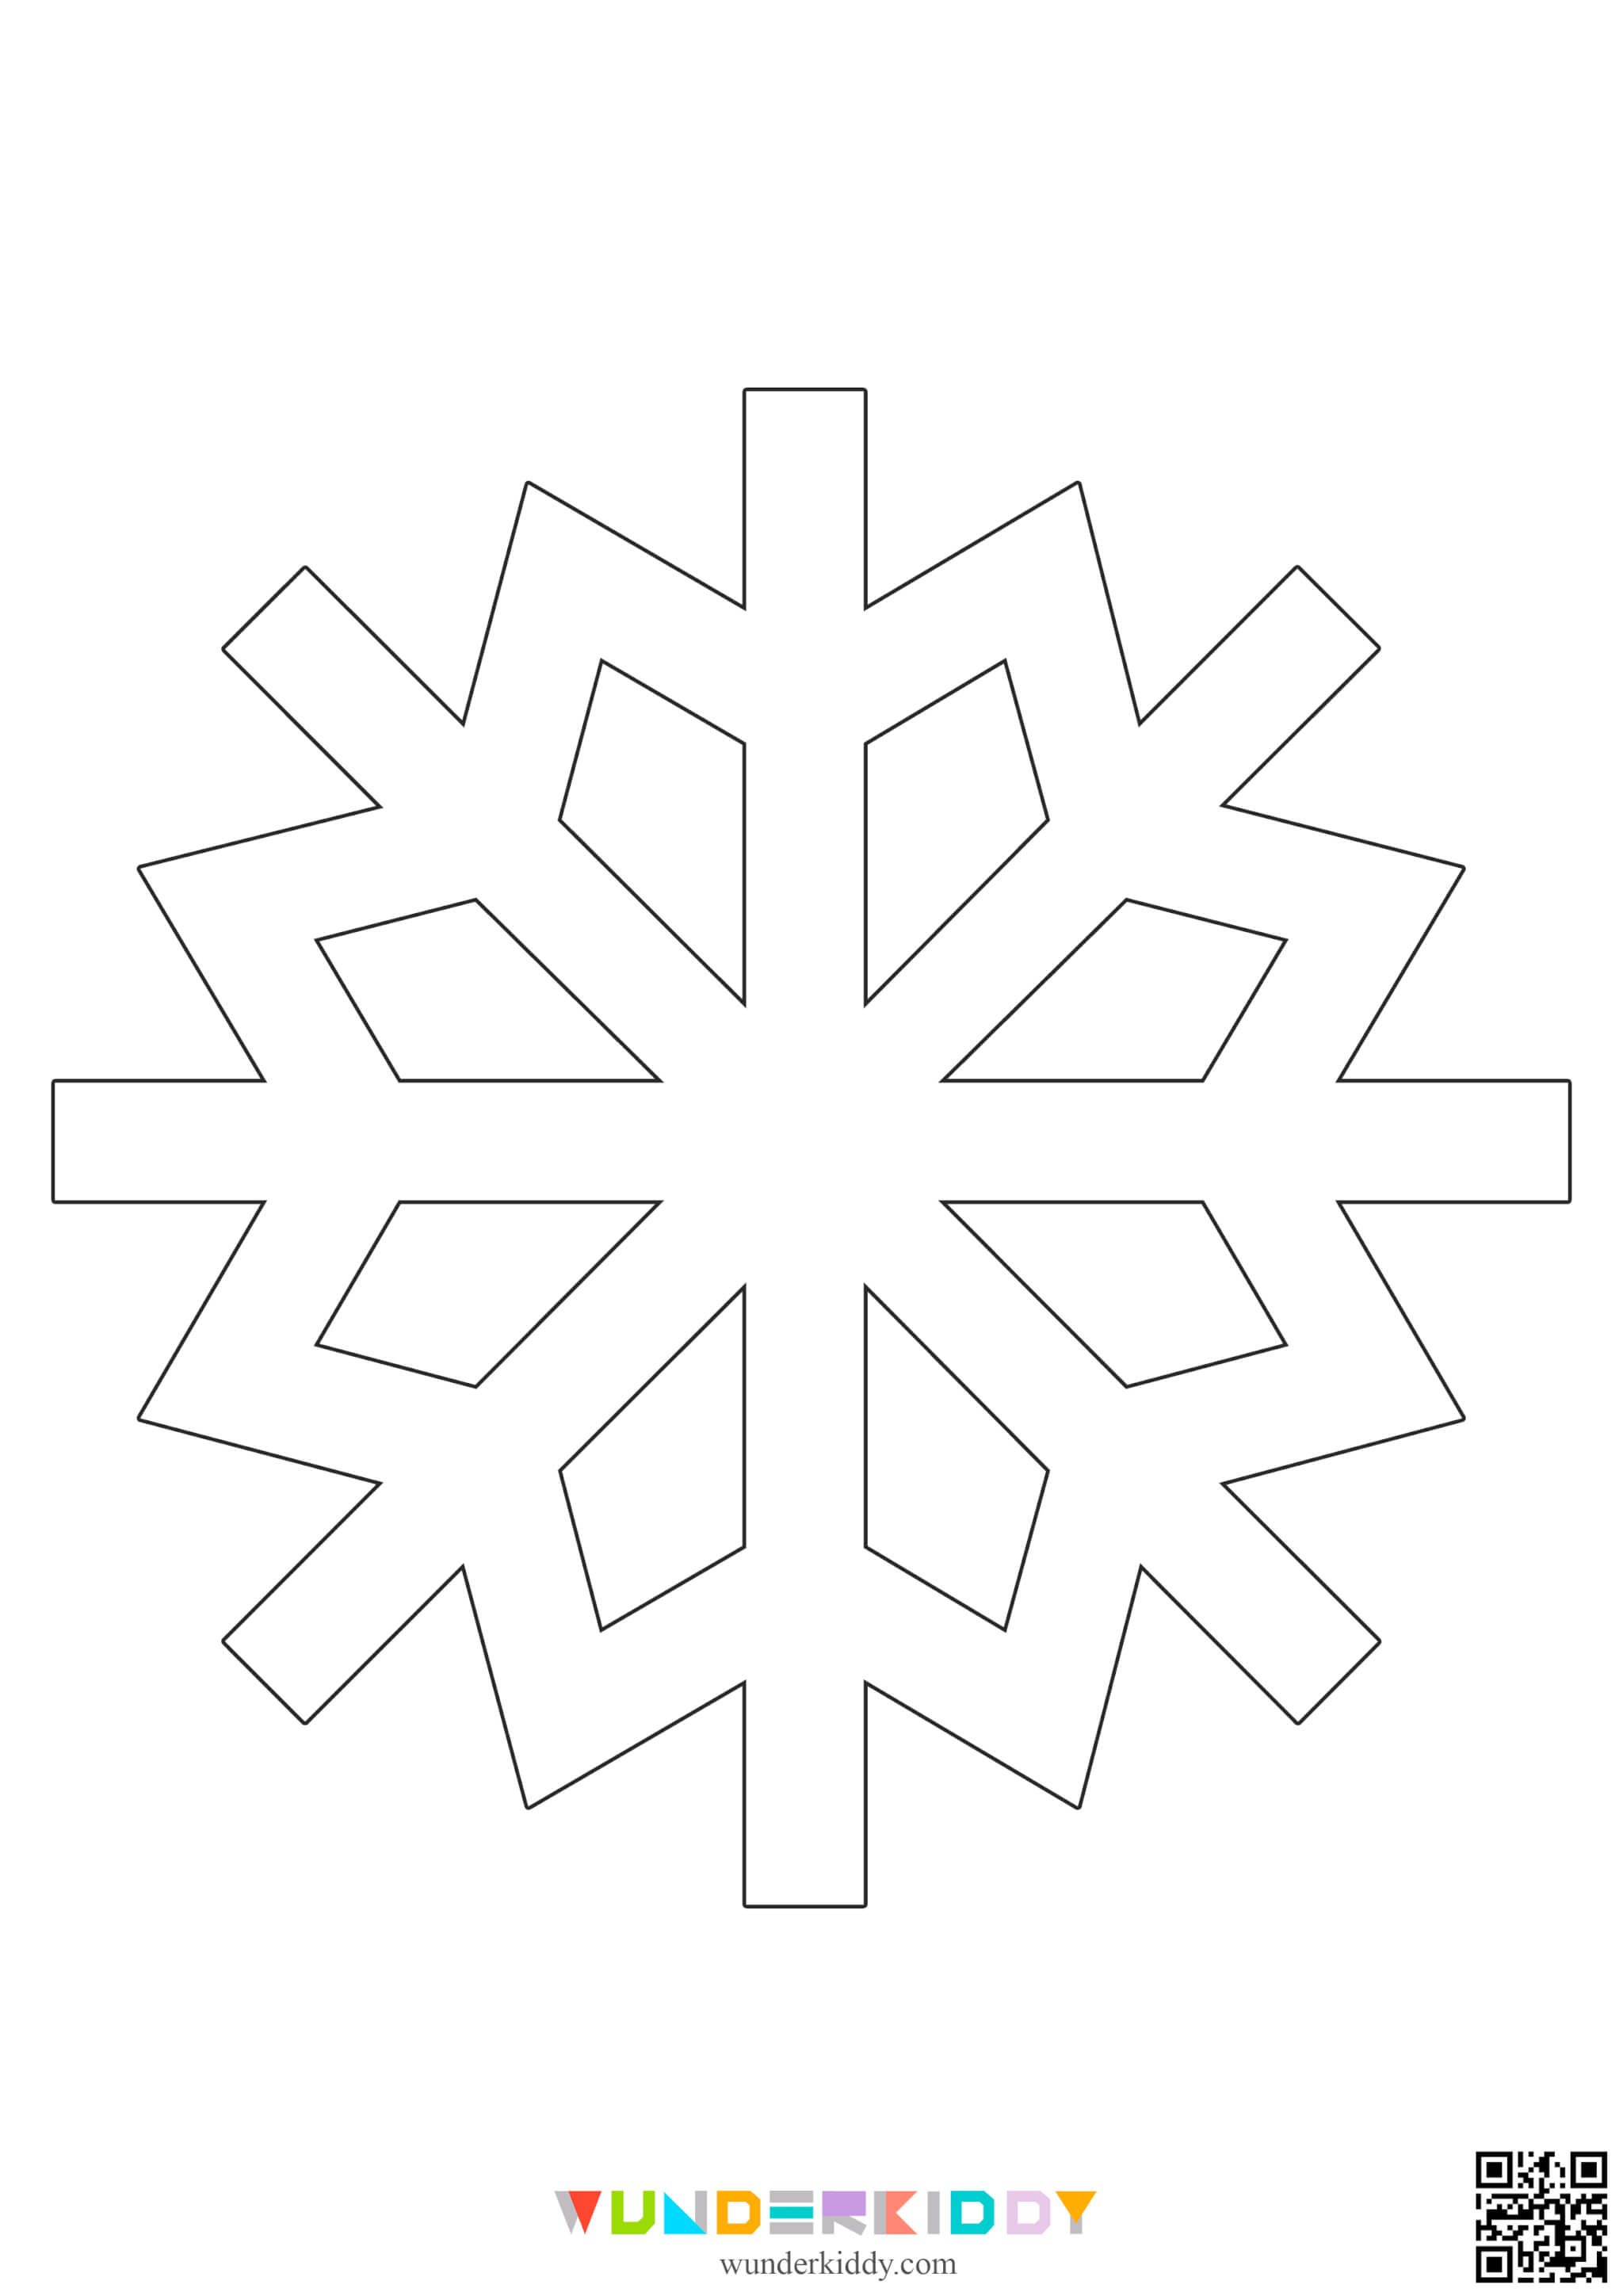 Snowflakes Template - Image 15